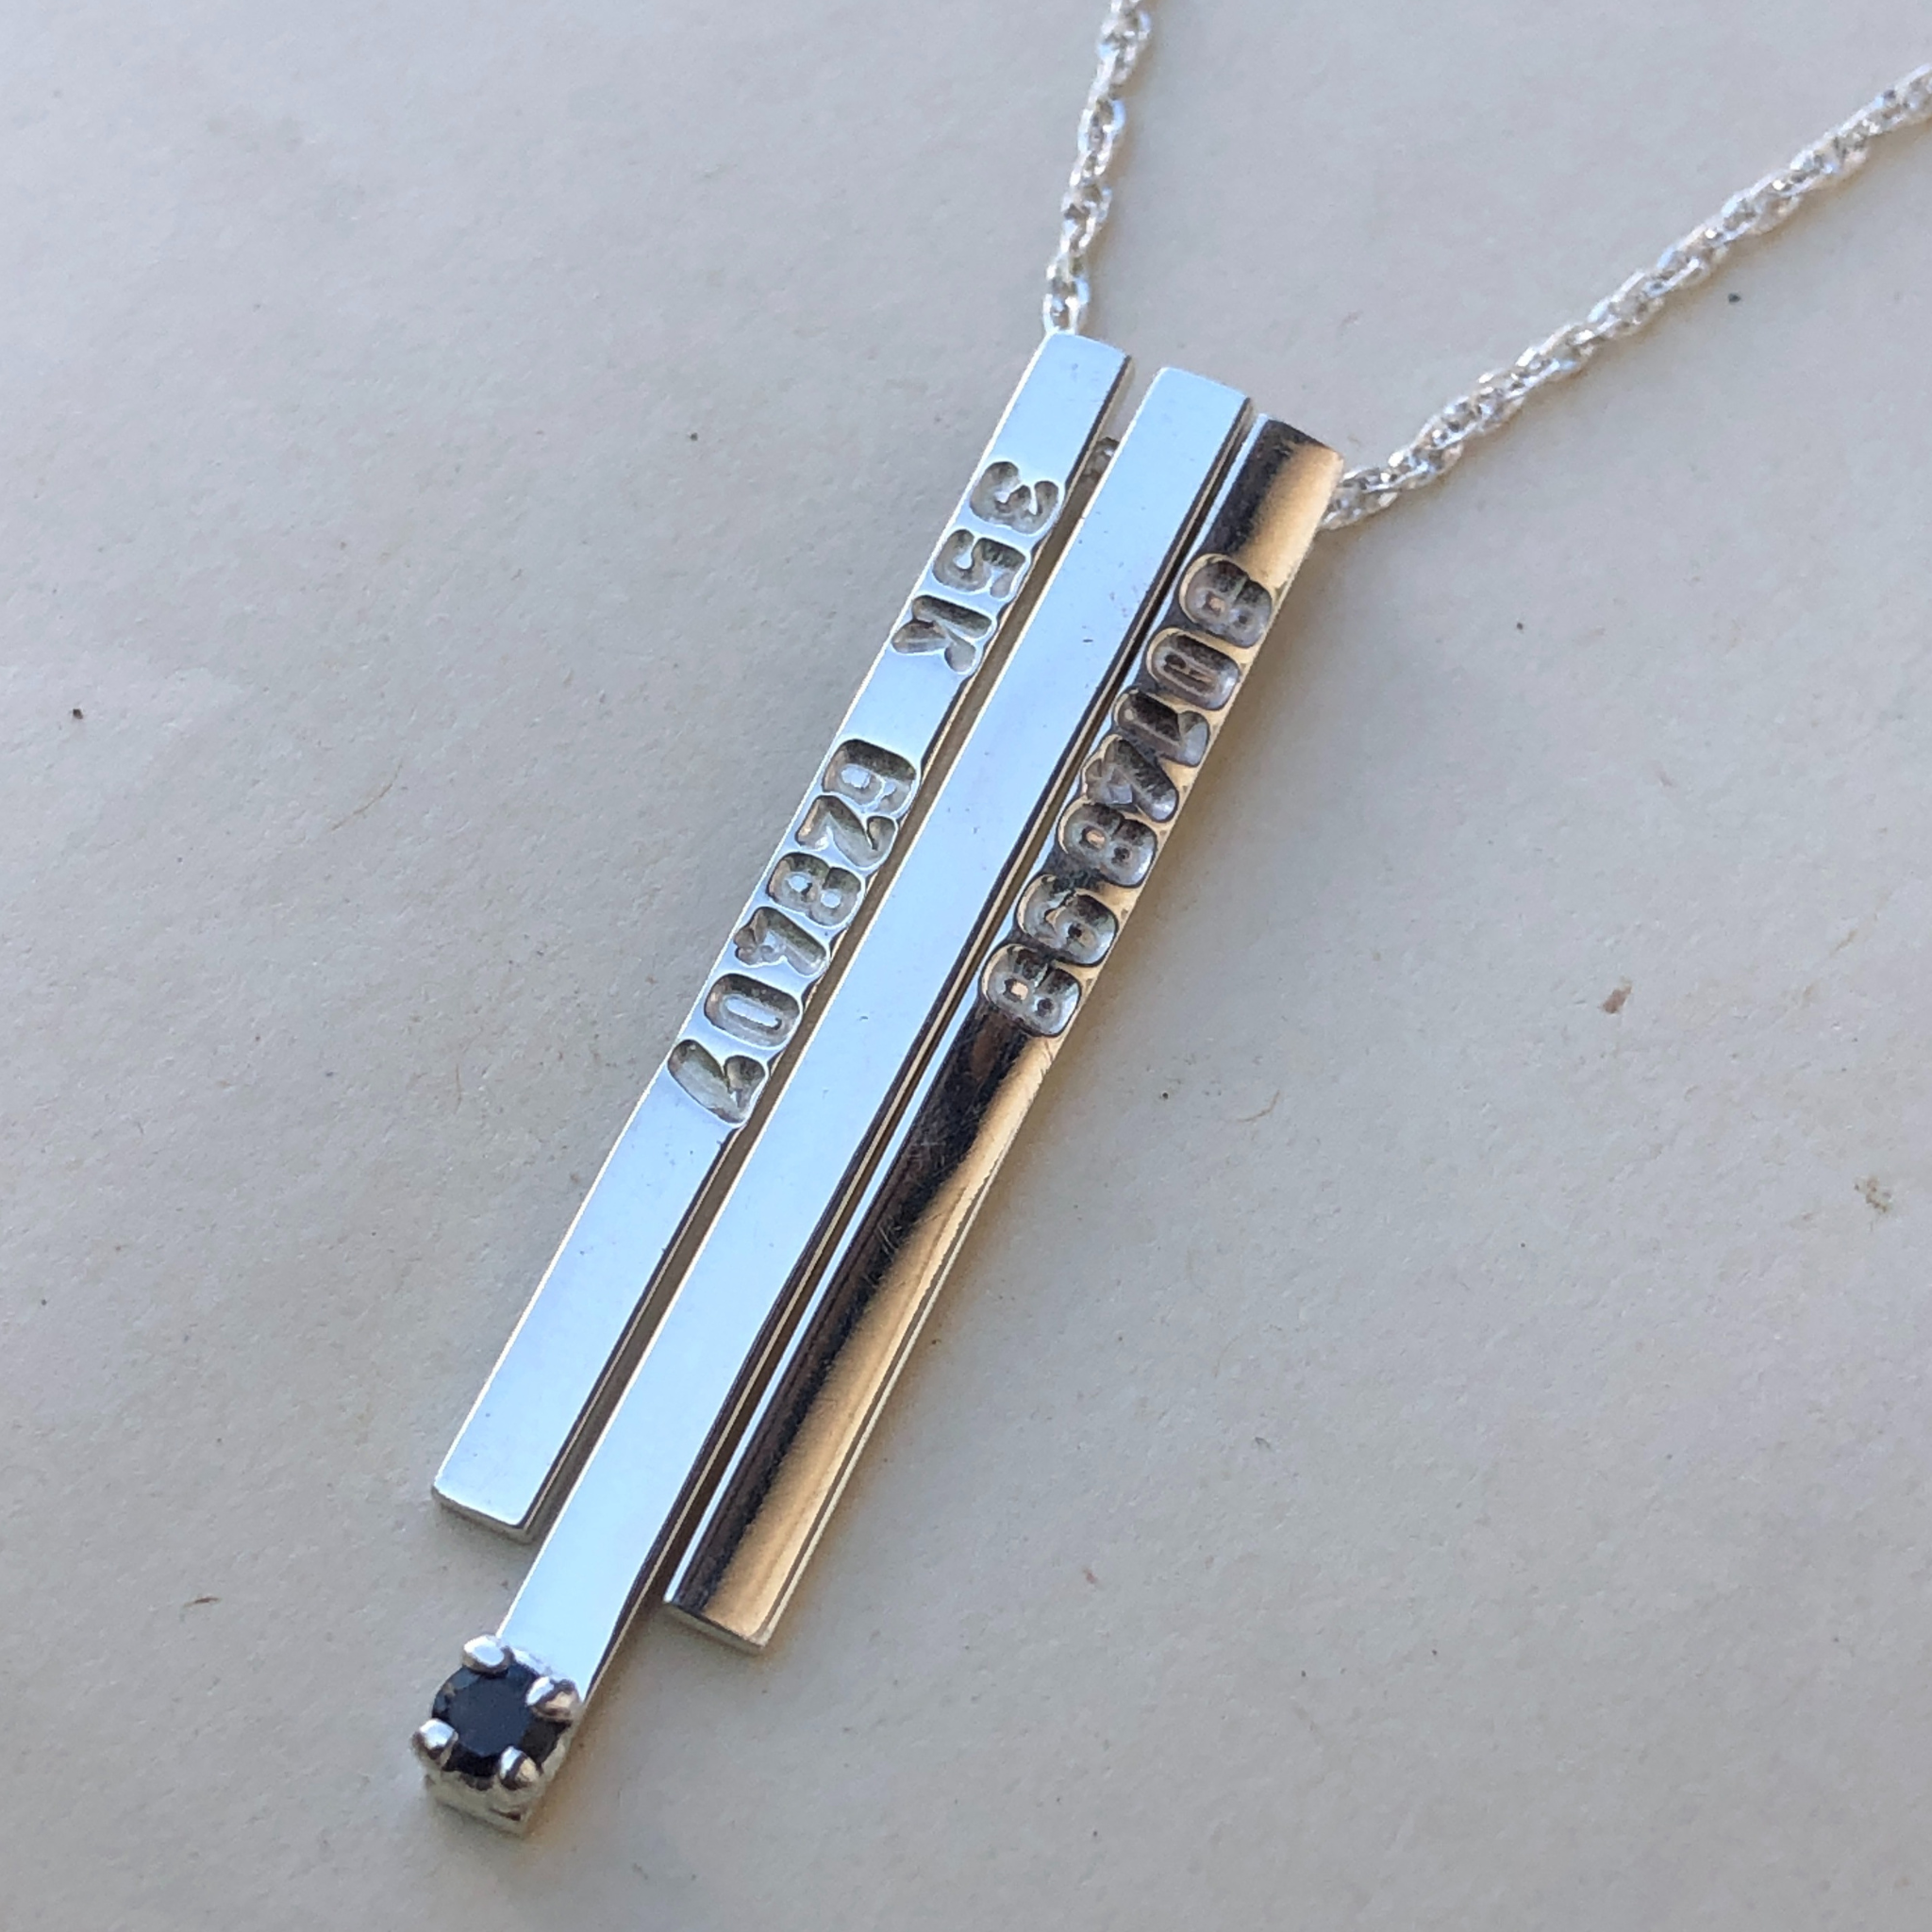 Birthstone Bar Necklace – Reflection of Memories